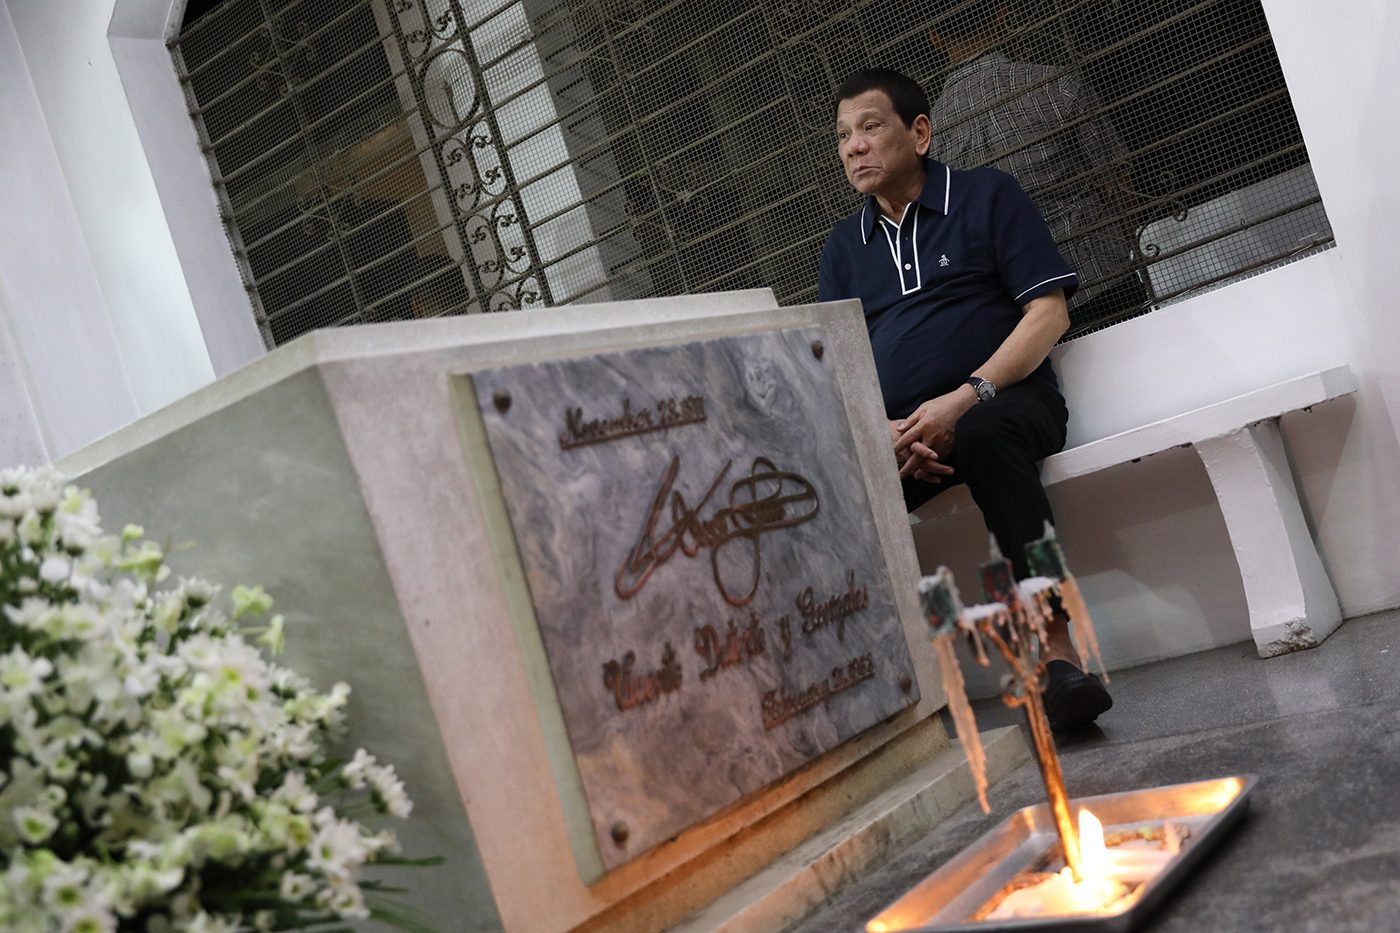 REFLECTION. President Rodrigo Duterte spends some quiet time at the Roman Catholic Cemetery in Davao City on February 4, 2019, as he visits the grave of his mother Soledad Duterte to commemorate her death anniversary. Malacañang photo 